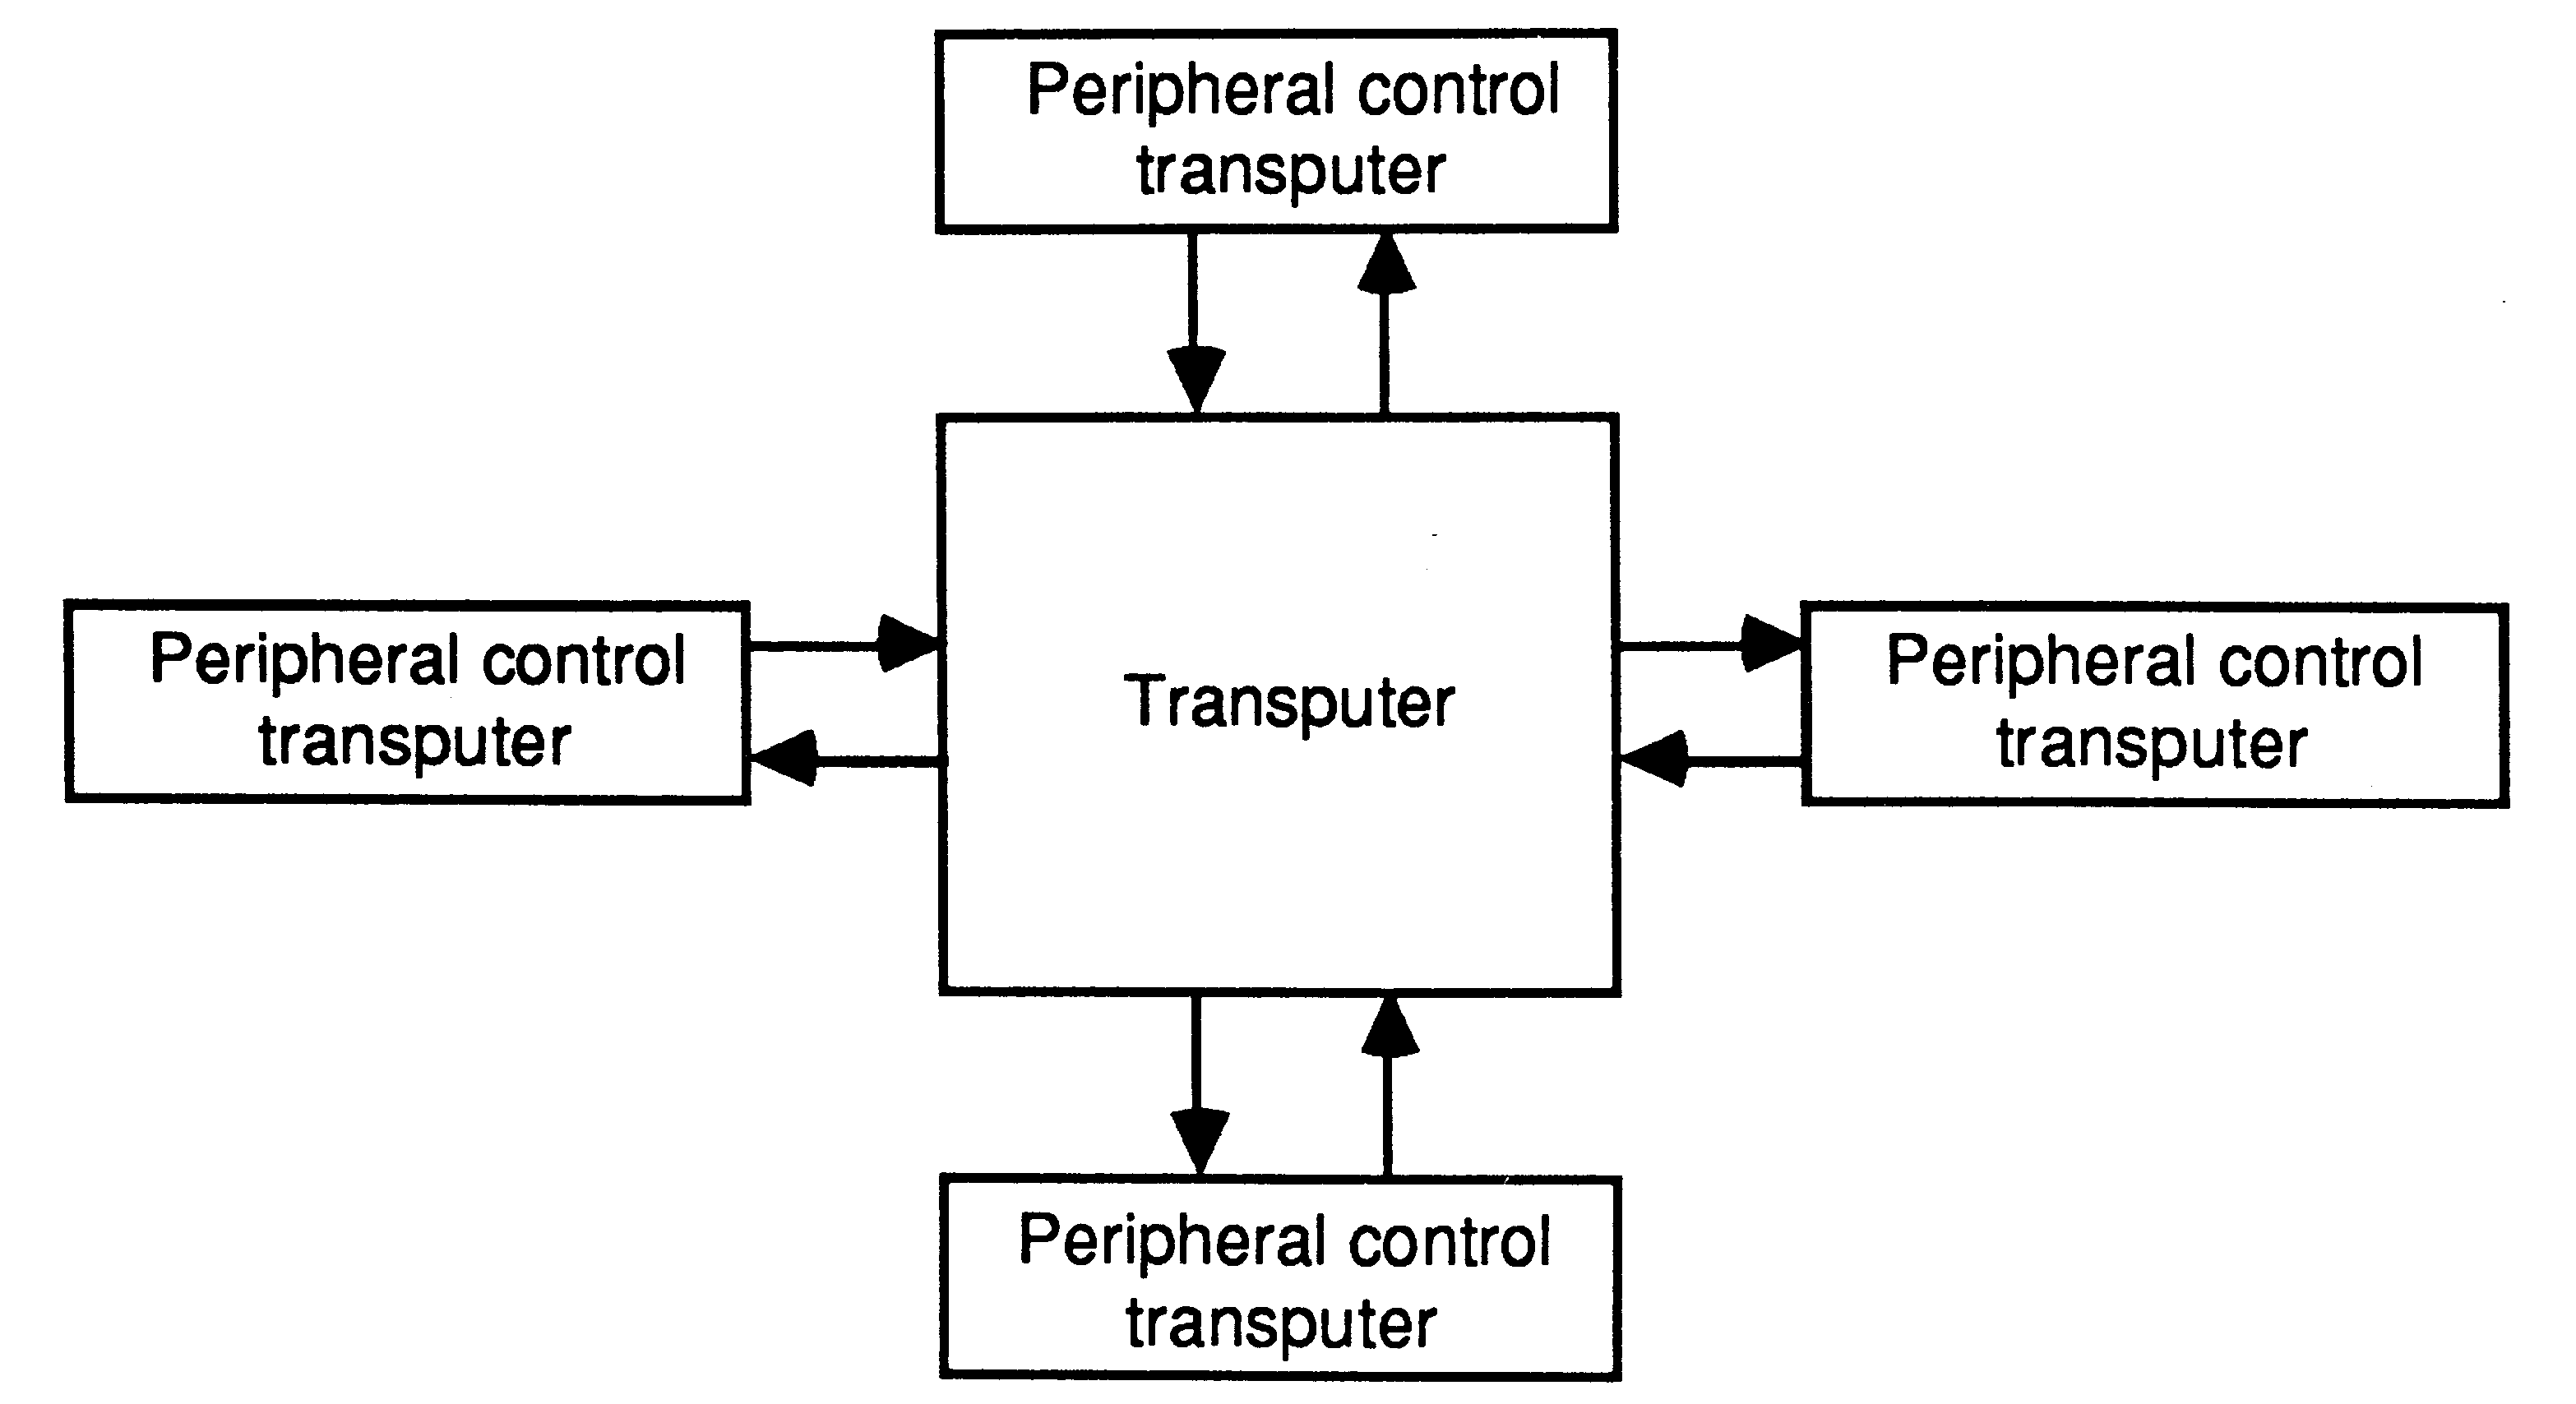 Transputer with peripheral
control transputers